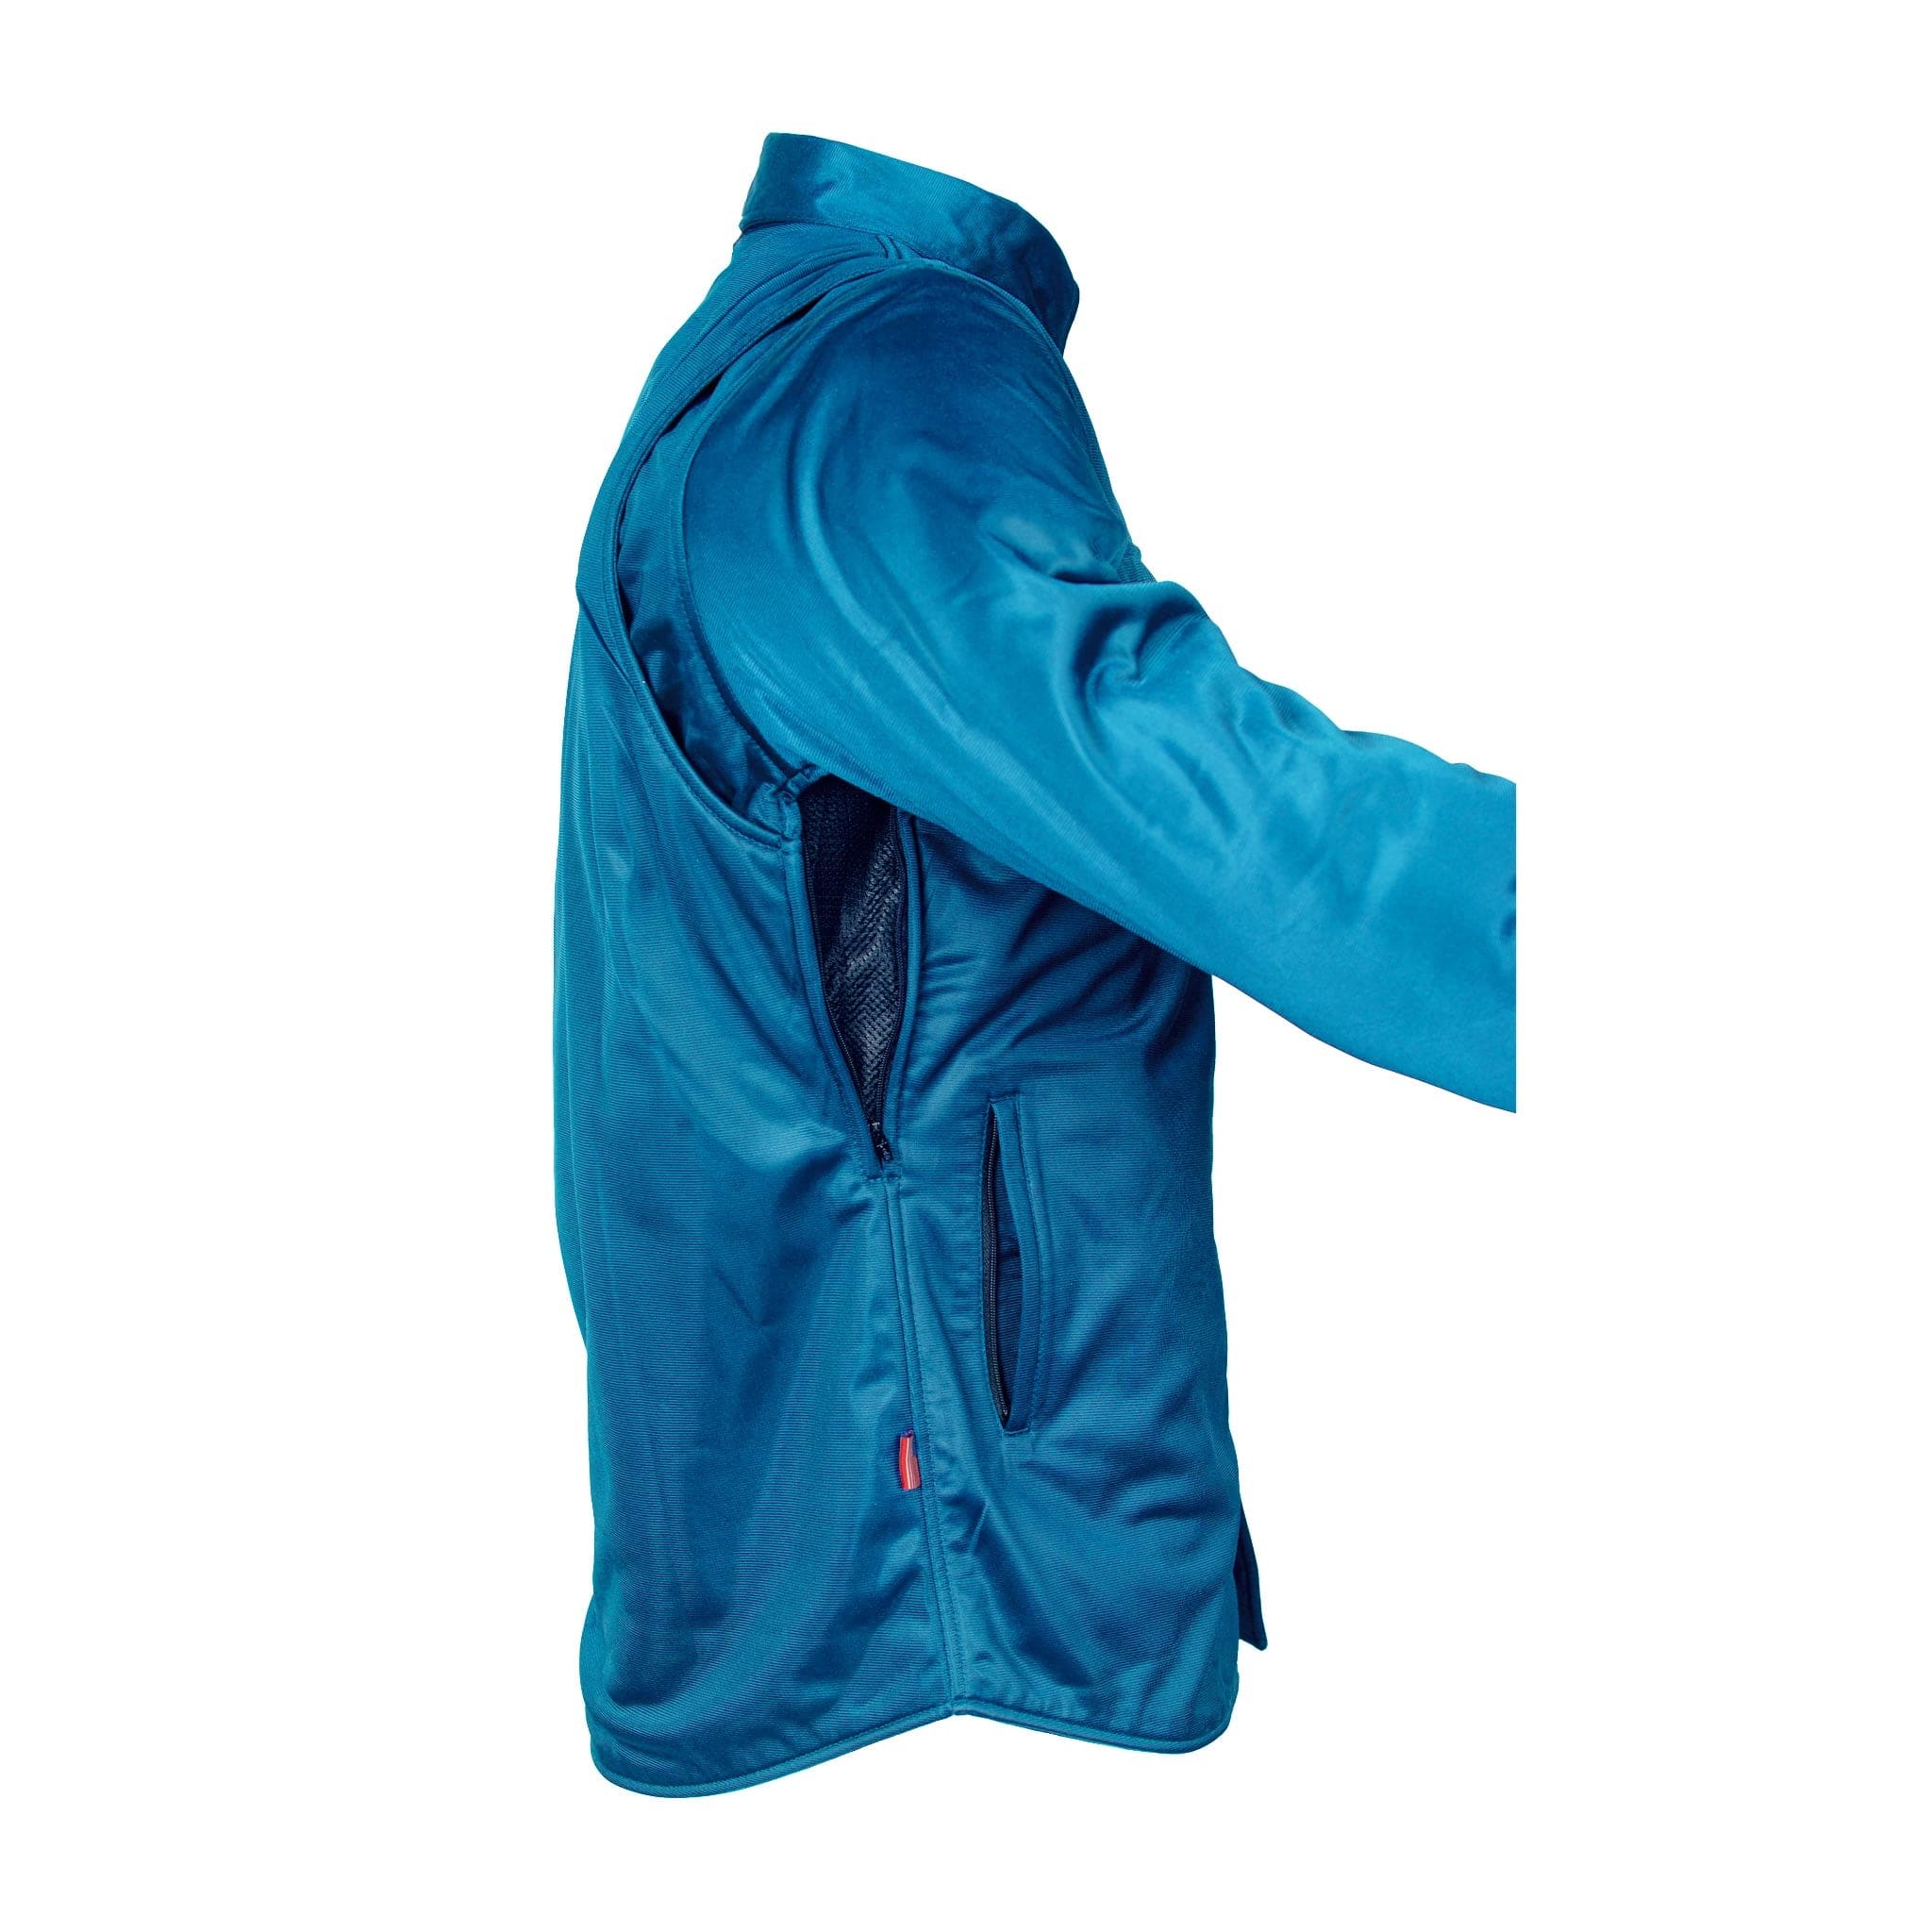 2023 Collection SALE Ultra Protective Shirt - Teal Solid